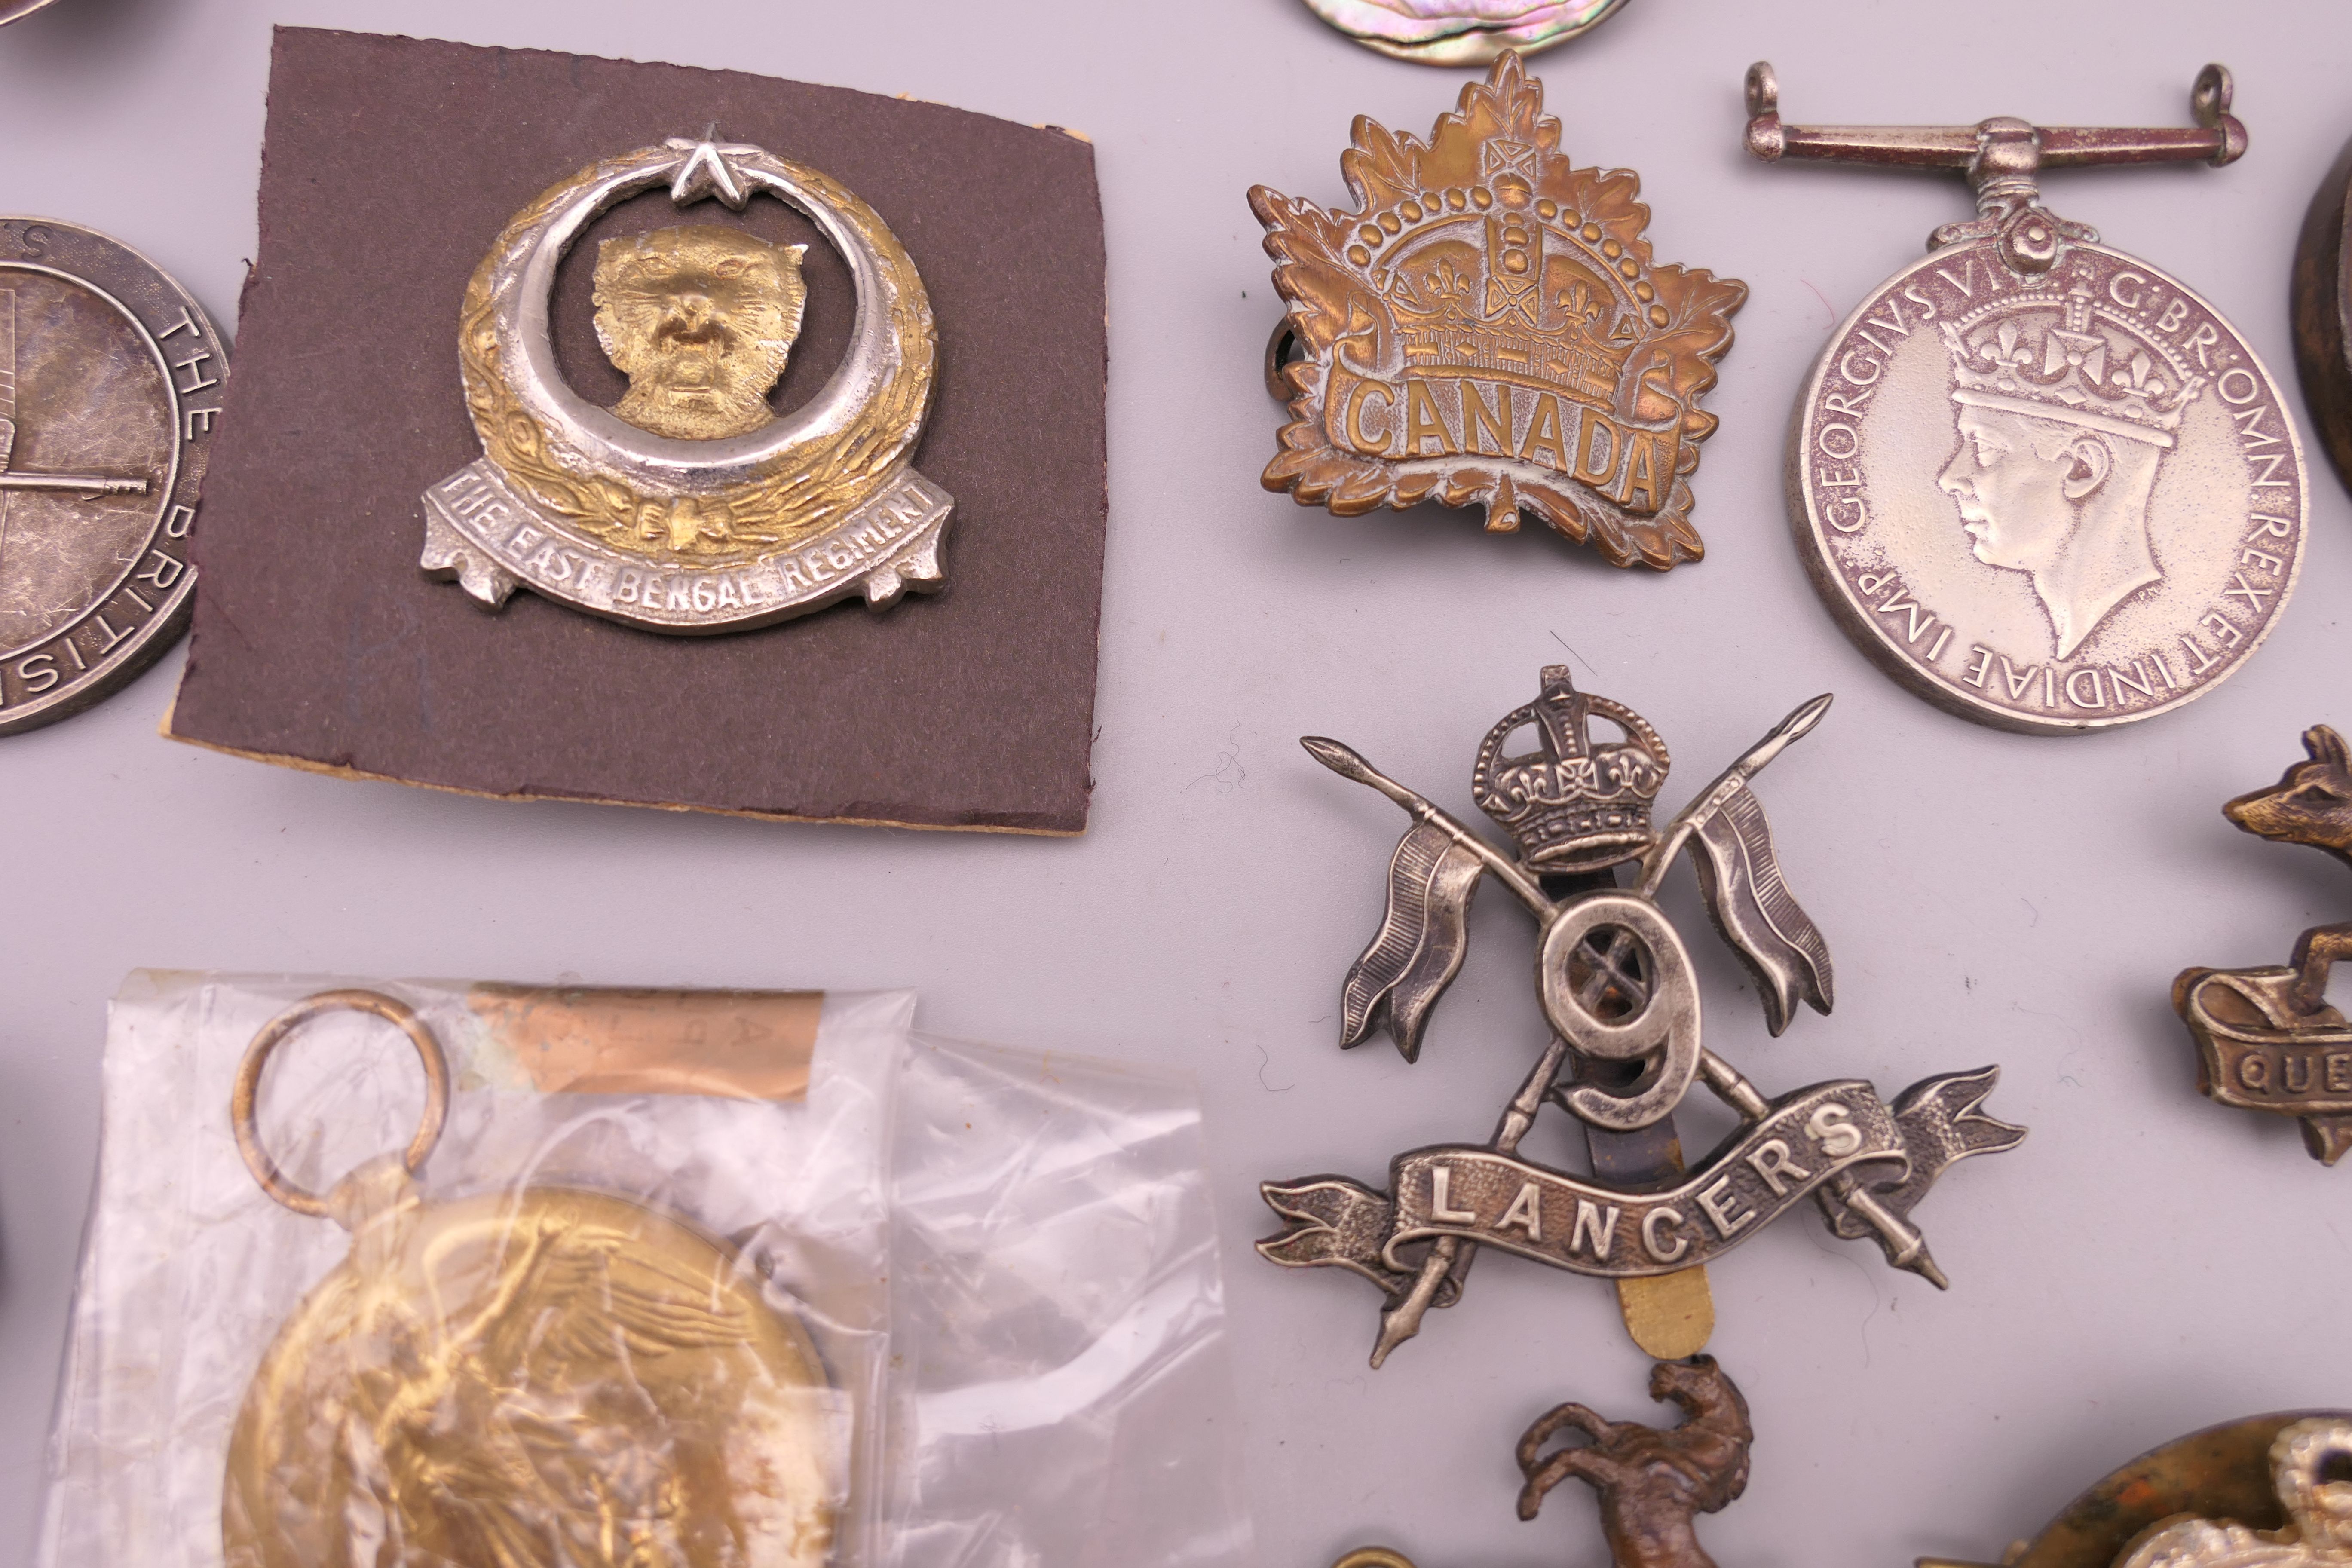 A quantity of various military medals, cap badges, coins, etc. - Image 6 of 9